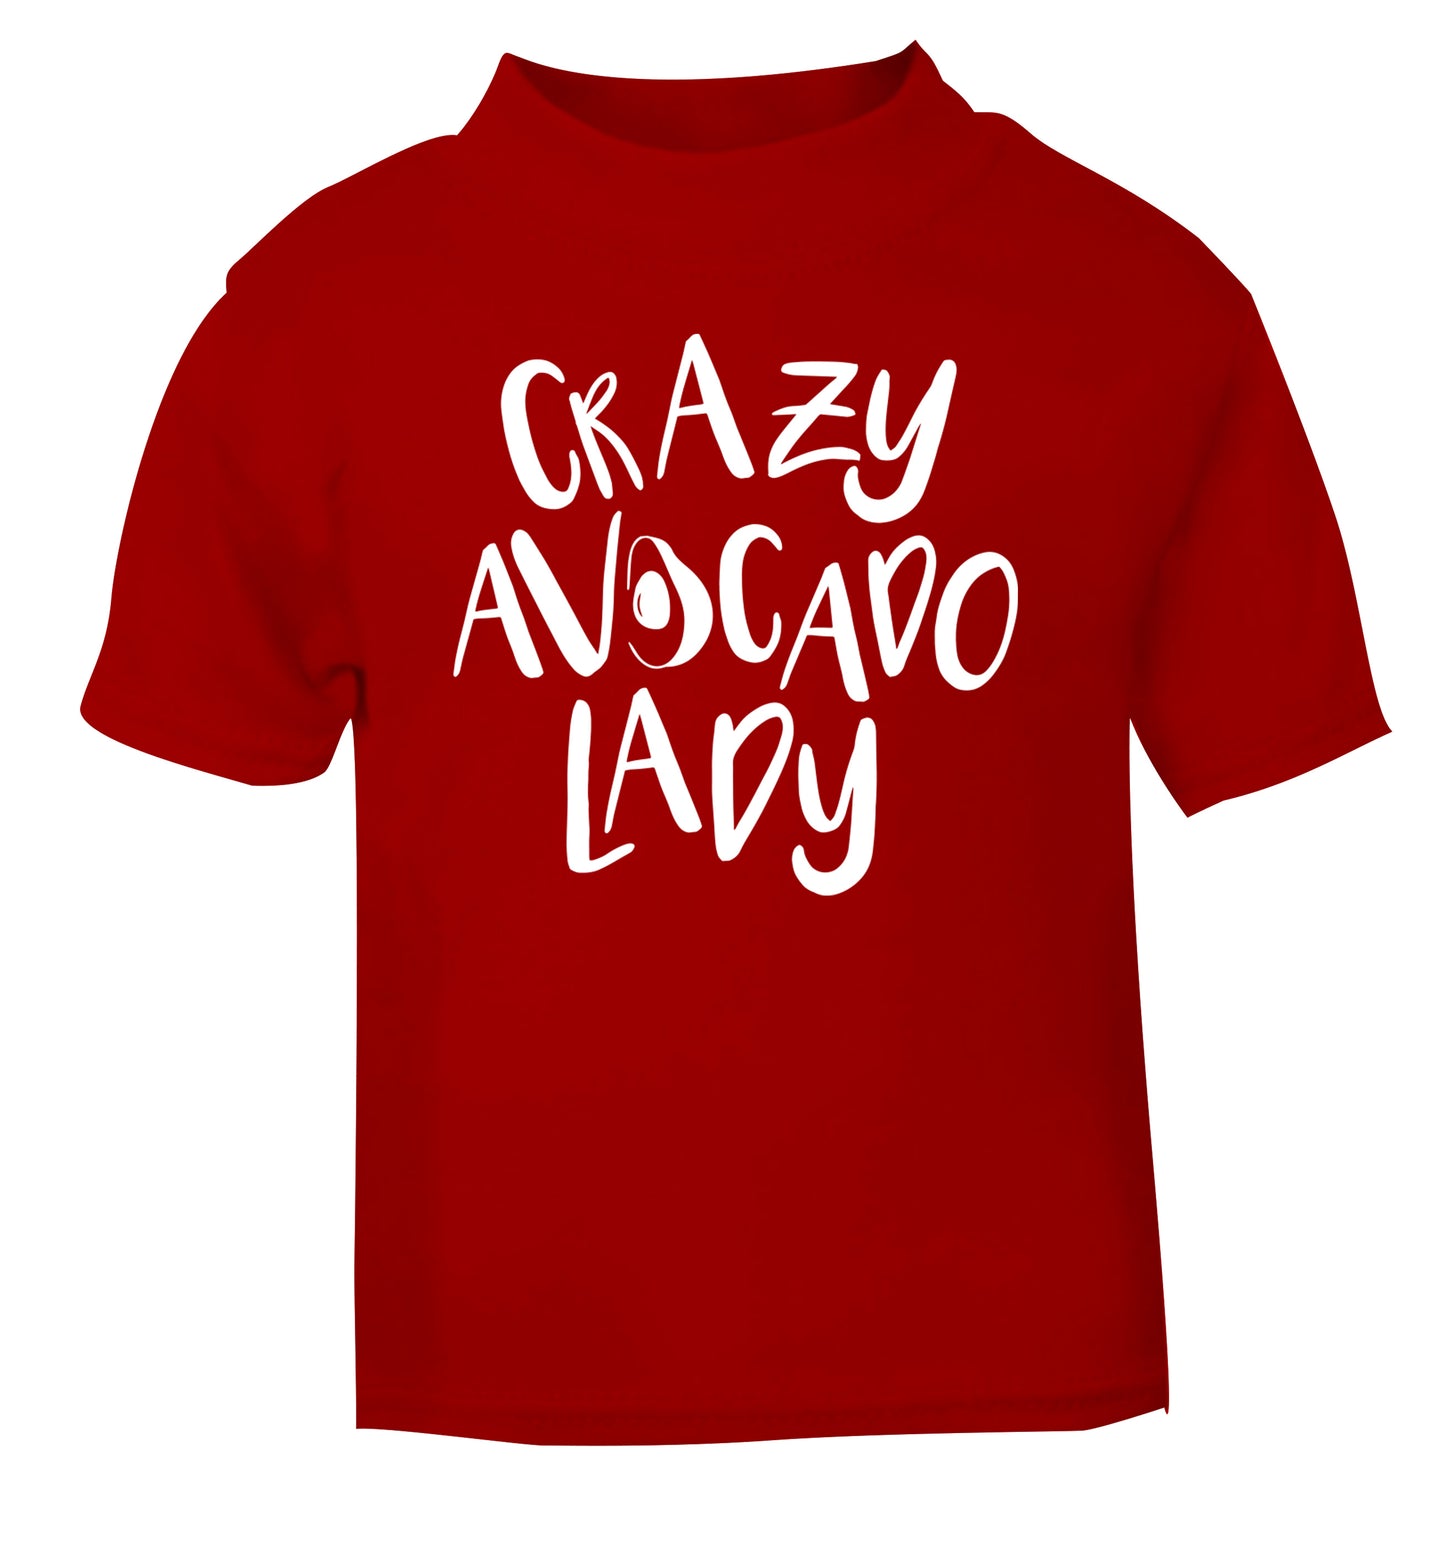 Crazy avocado lady red Baby Toddler Tshirt 2 Years